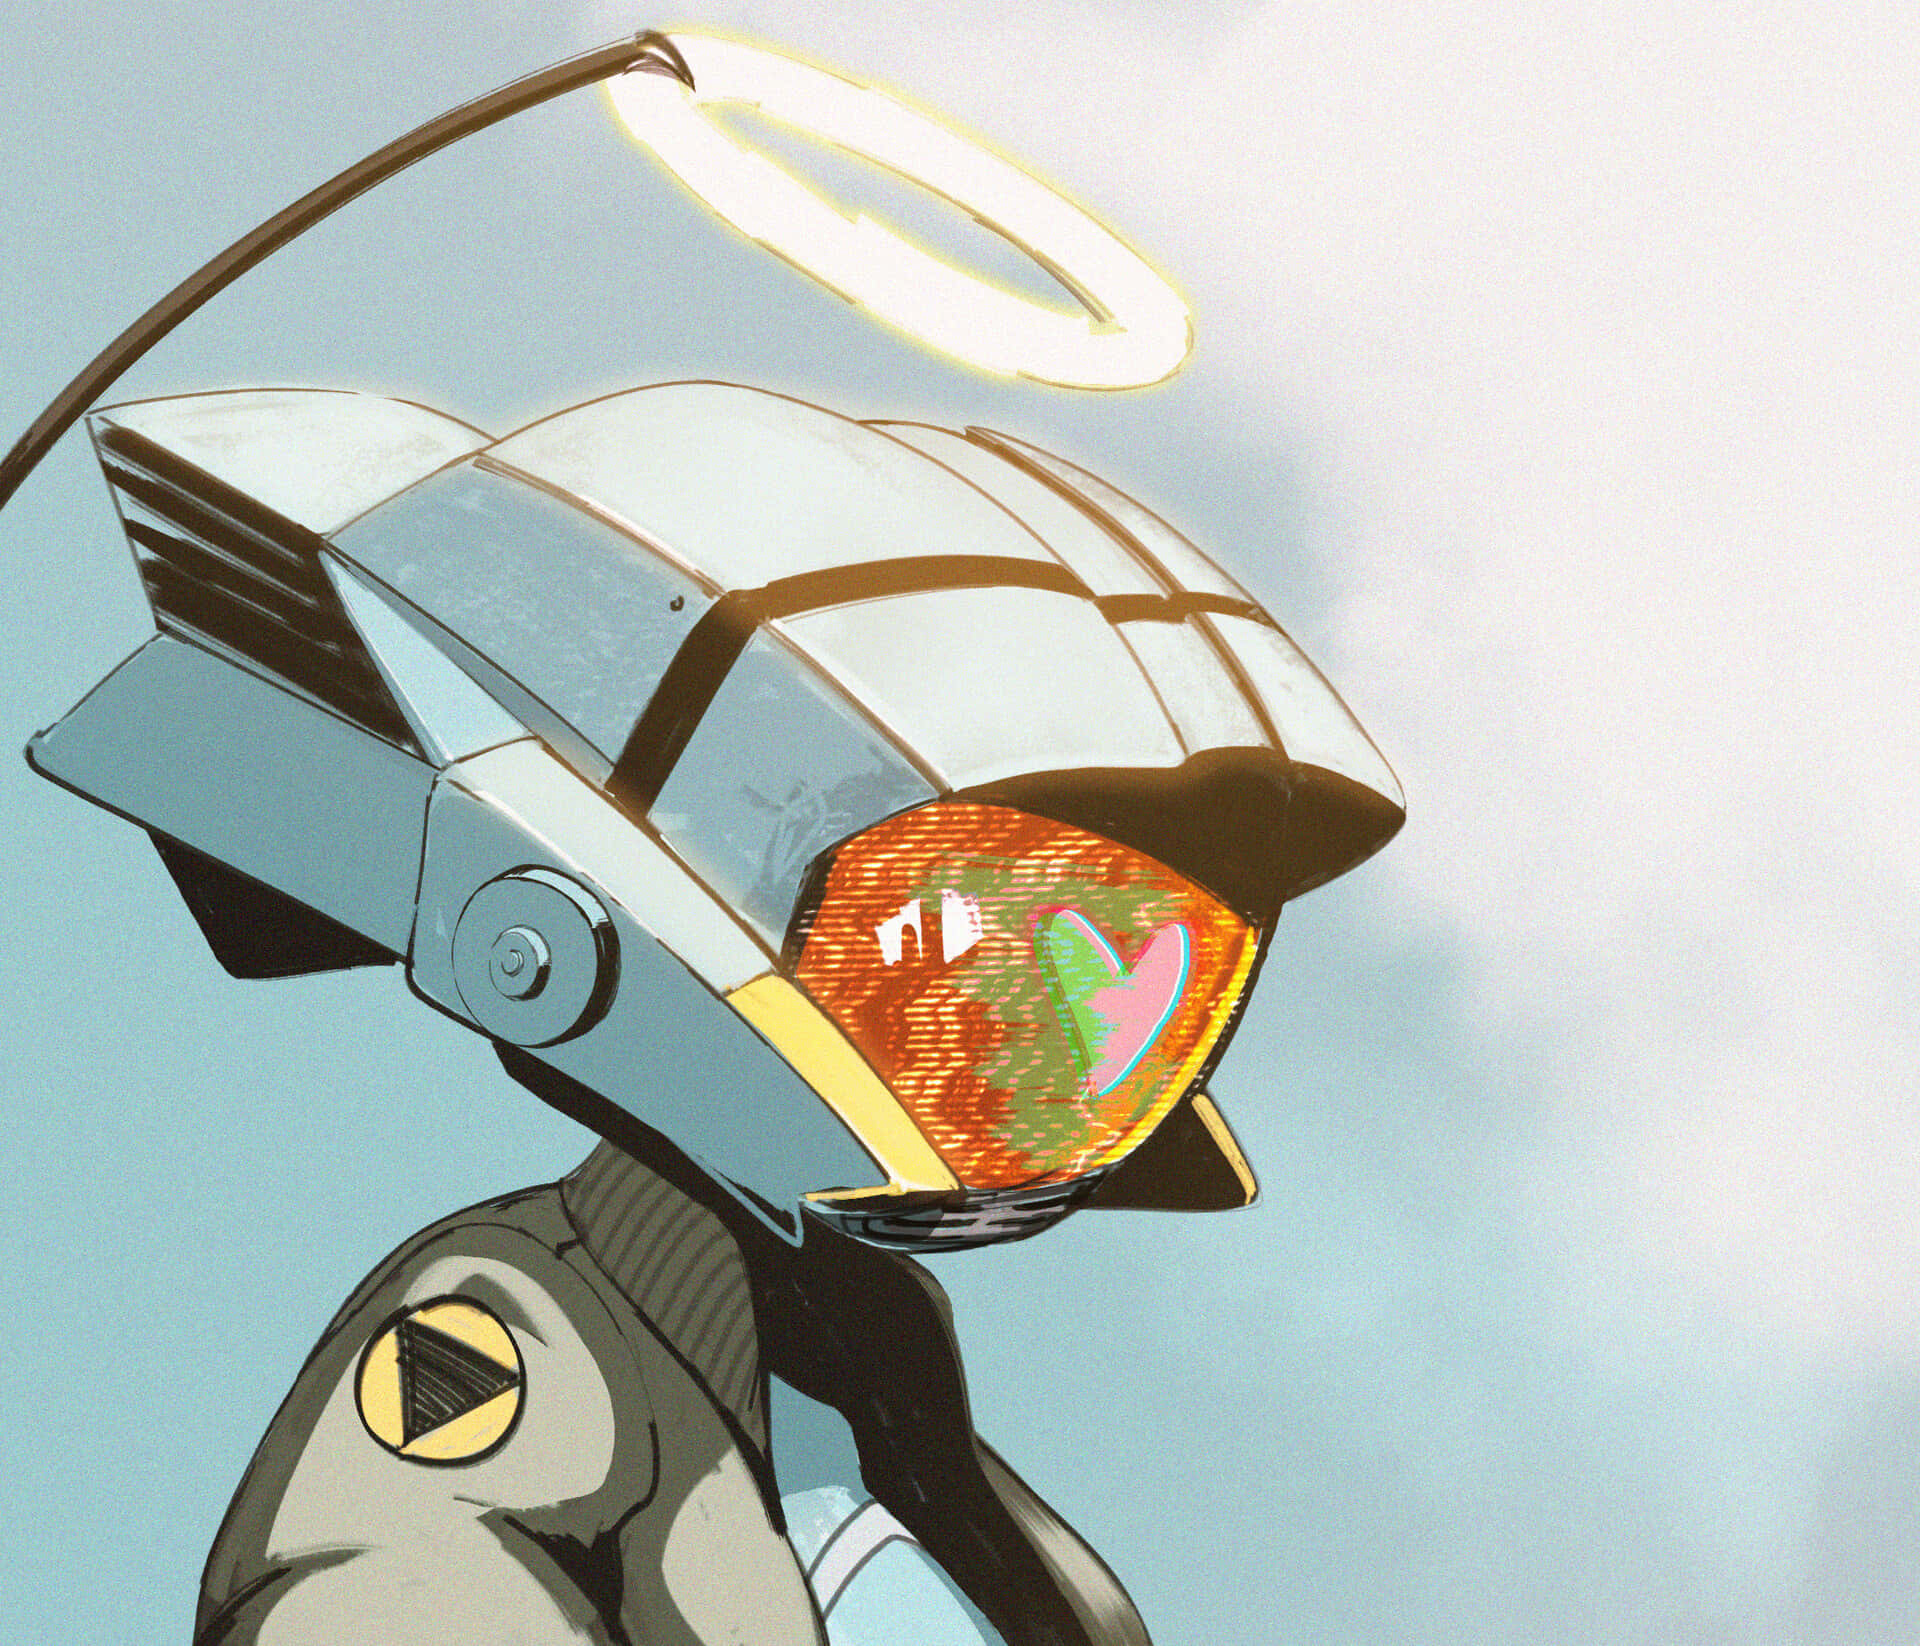 FLCL Canti - The Enigmatic Robot in Action Wallpaper